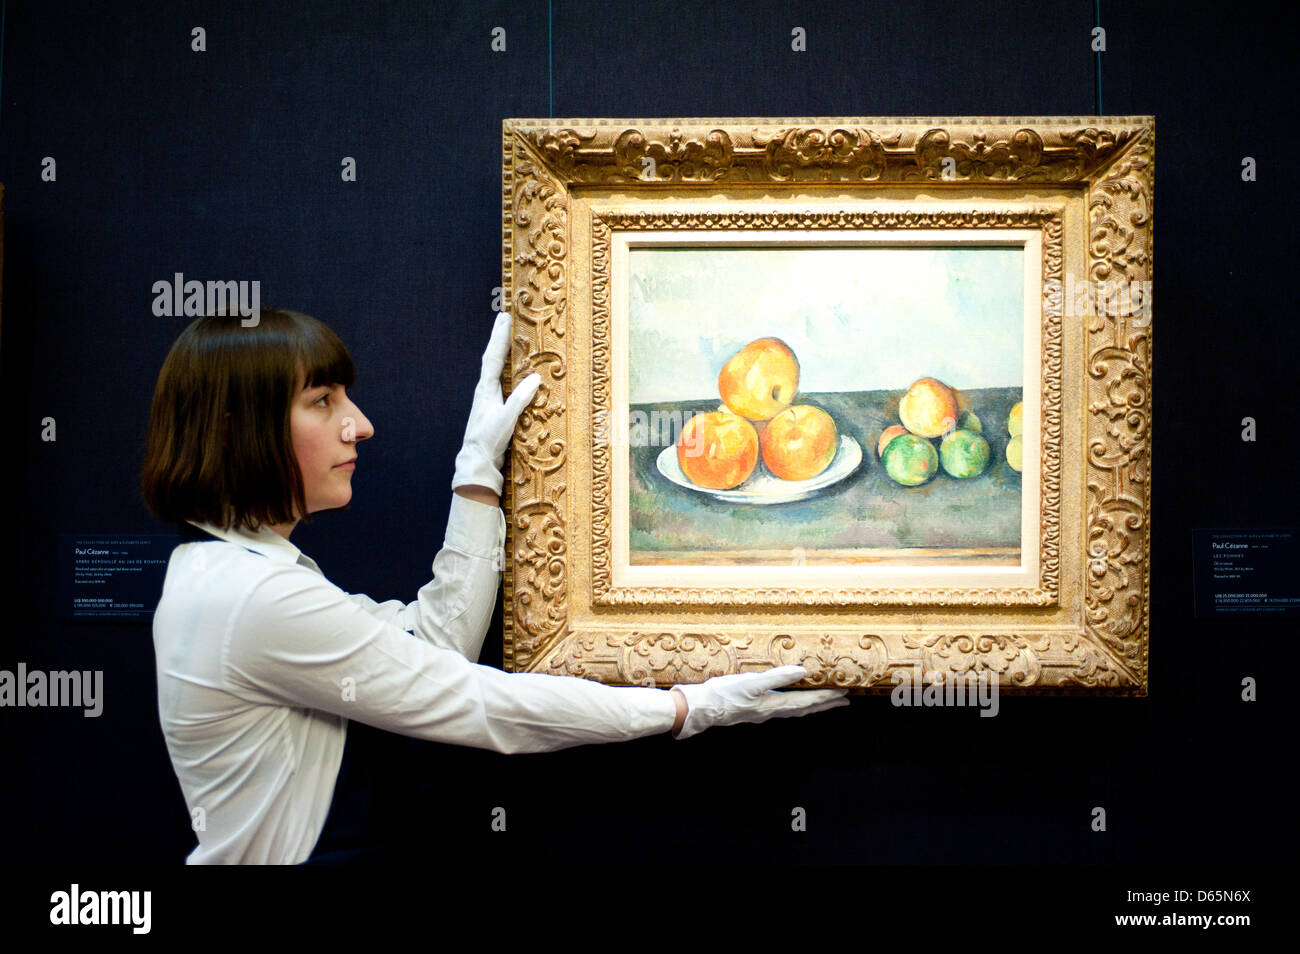 London, UK. 12th April 2013. A Sotheby's employee poses in front of Paul Cezanne 'Les Pommes 1889-1890'  (Est. $25-35 million). The work will go on sale at Sotheby’s New York in May 2013. The Blockbuster sales at include works by Richter, Modigliani, Picasso, Rodin, Bacon, Cezanne. Credit: Piero Cruciatti / Alamy Live News Stock Photo